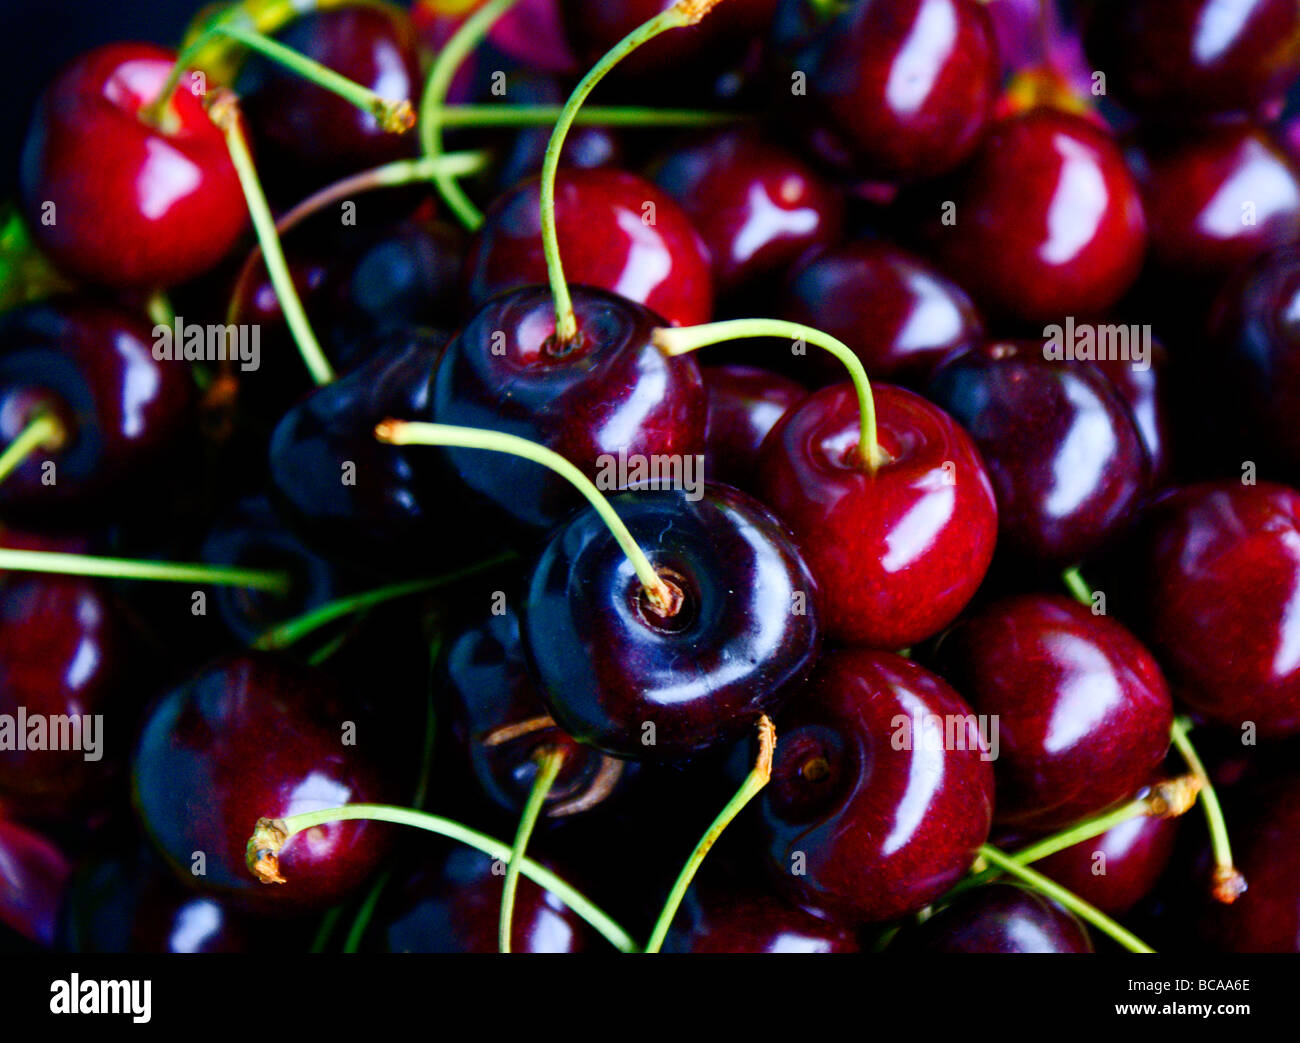 Freshly picked ripe and juicy cherries in soft focus. Stock Photo